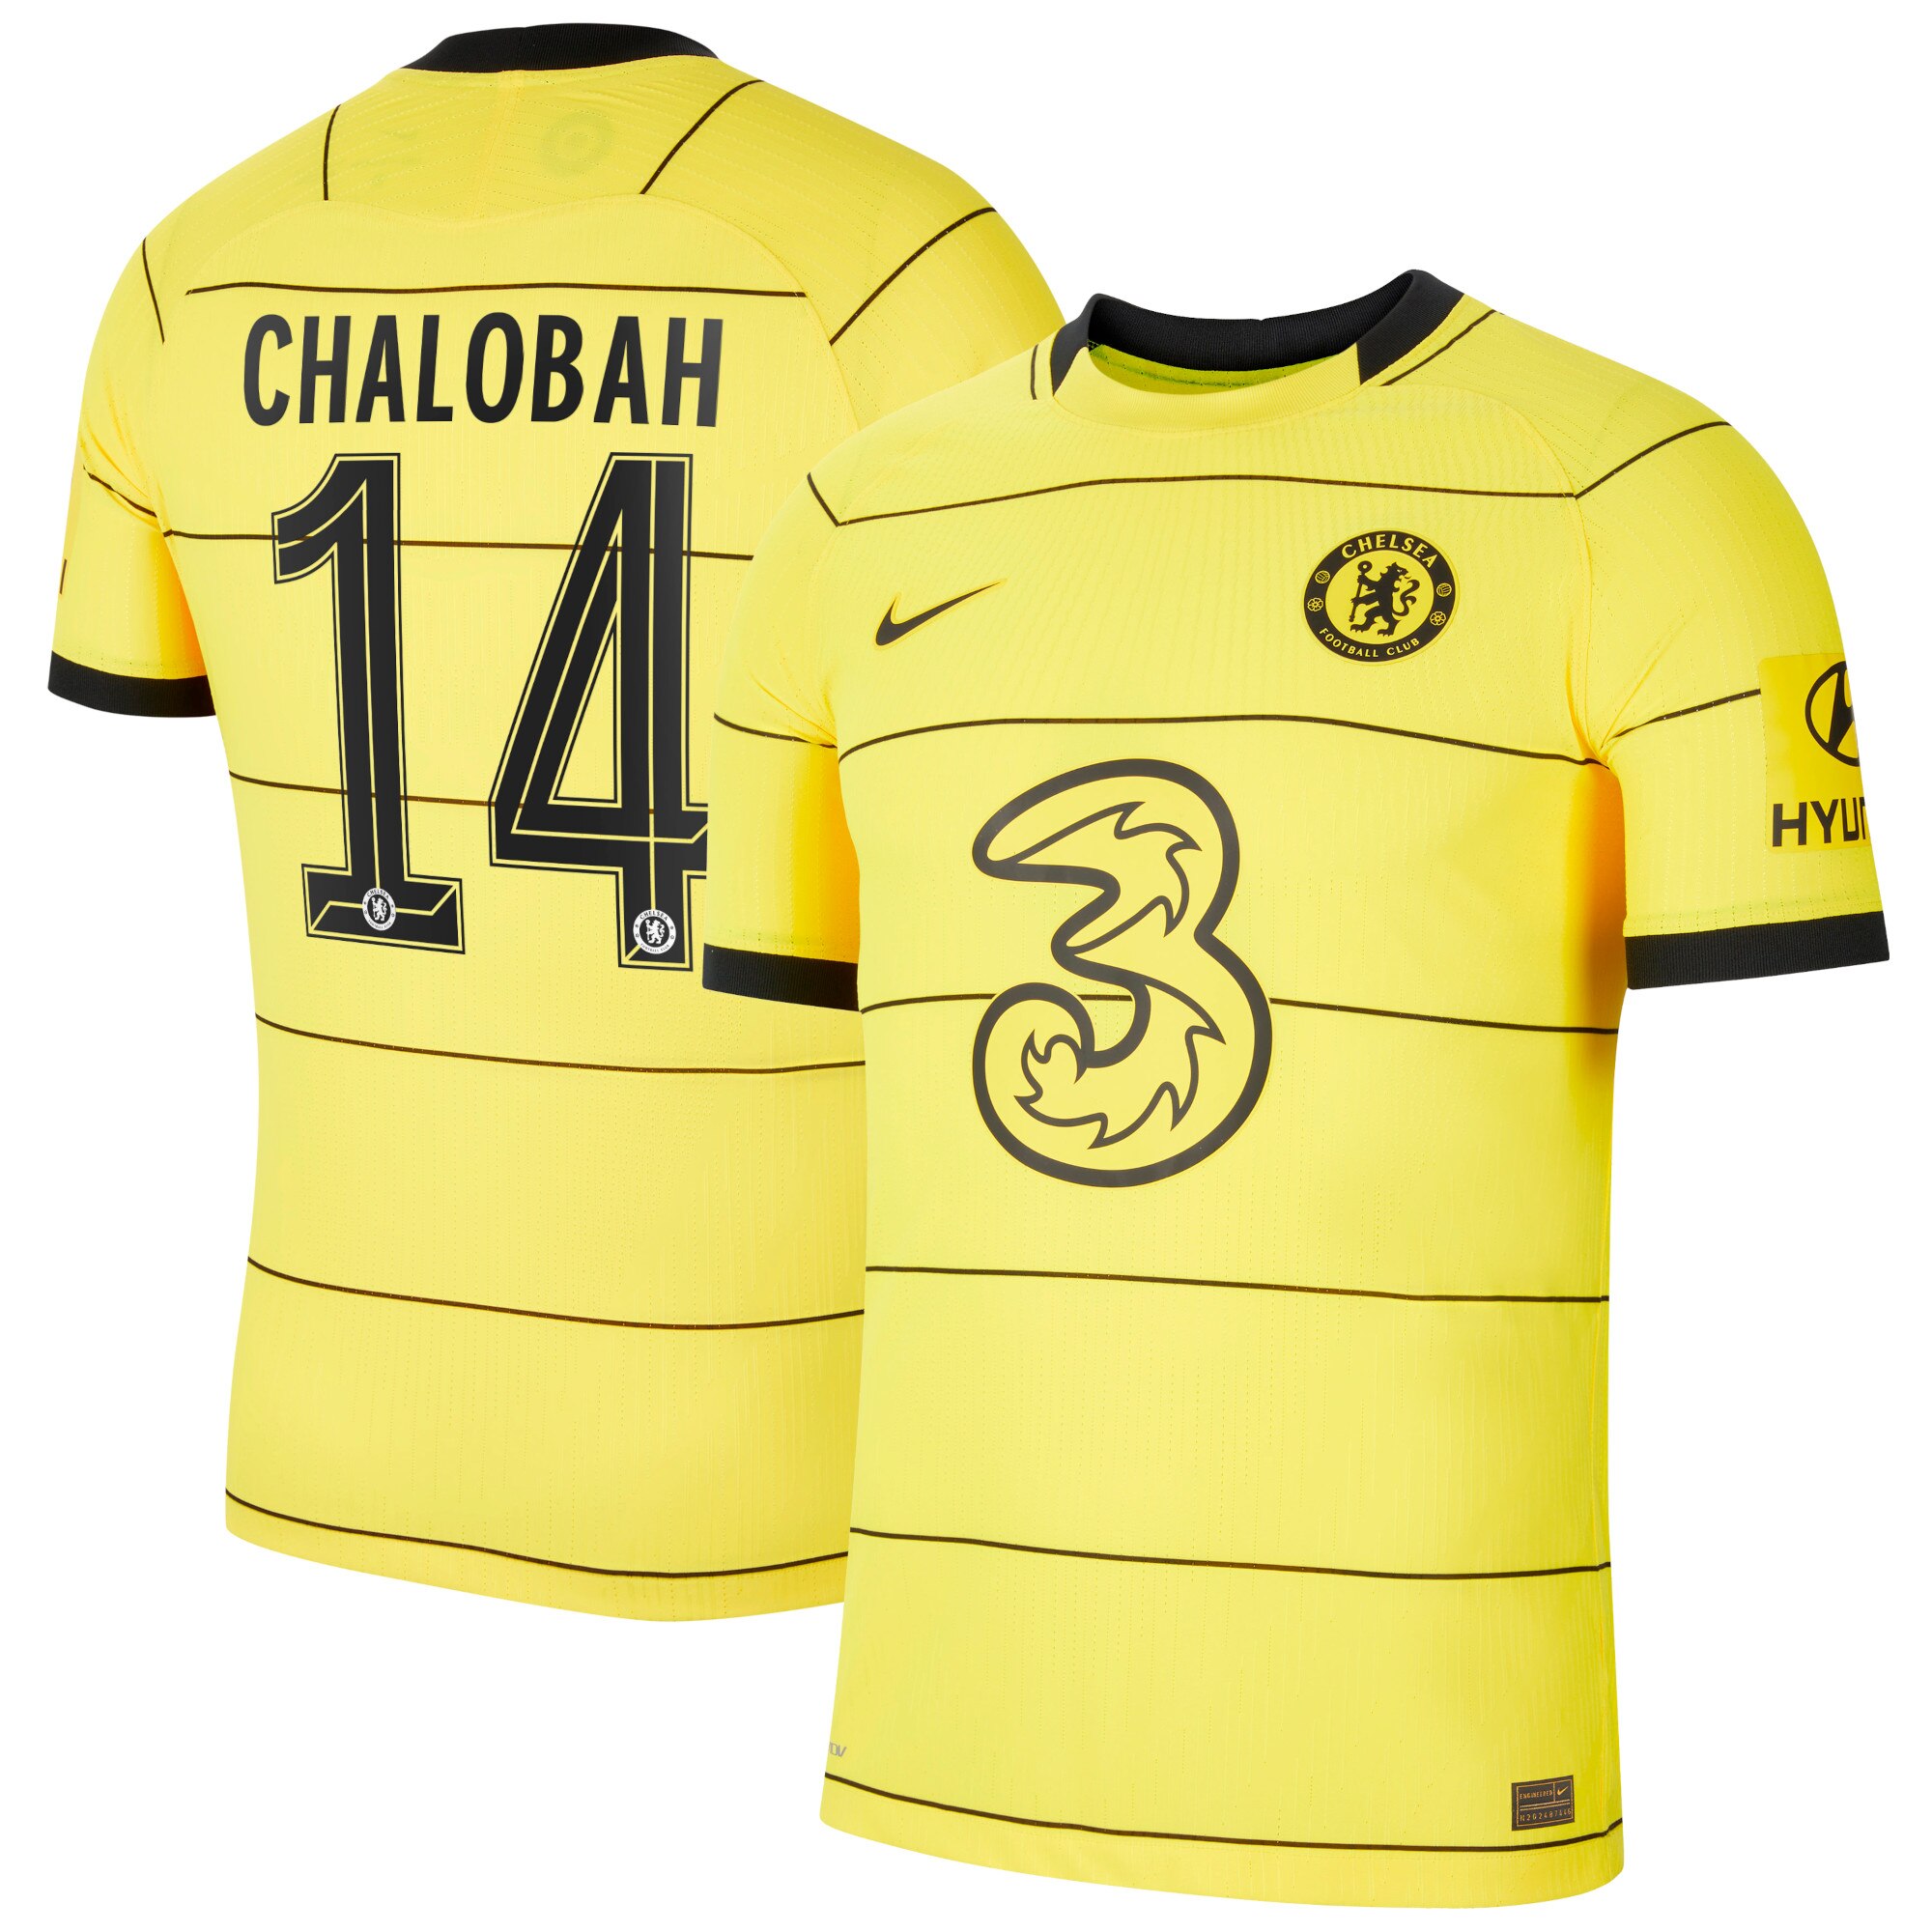 Chelsea Cup Away Vapor Match Shirt 2021-22 with Chalobah 14 printing